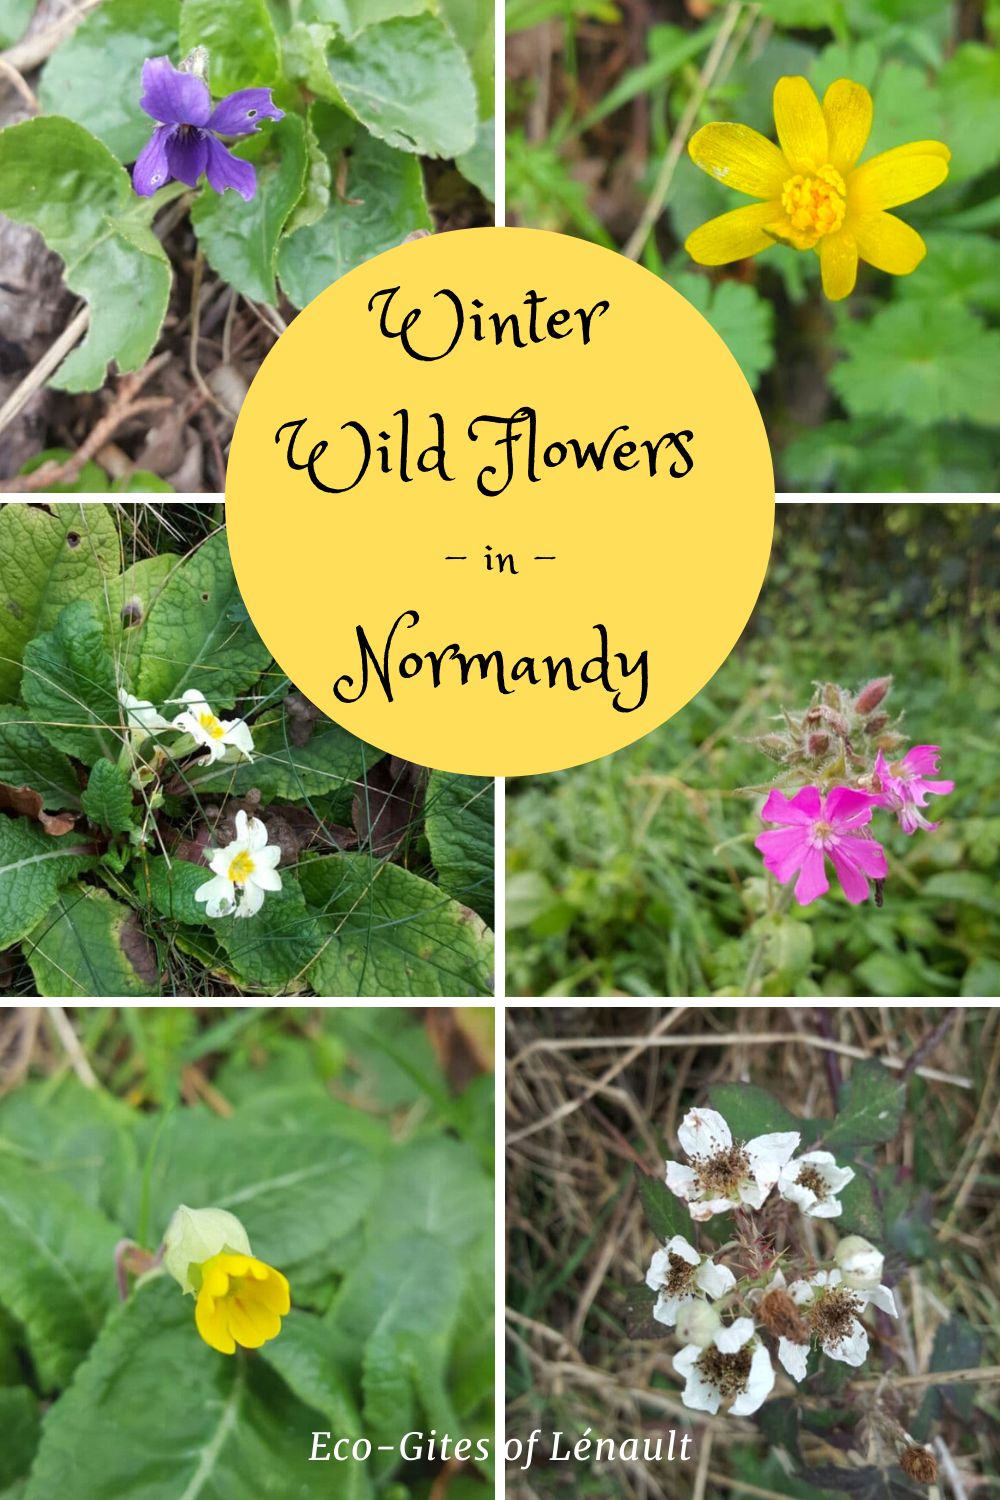 Winter Wild Flowers in Normandy,France